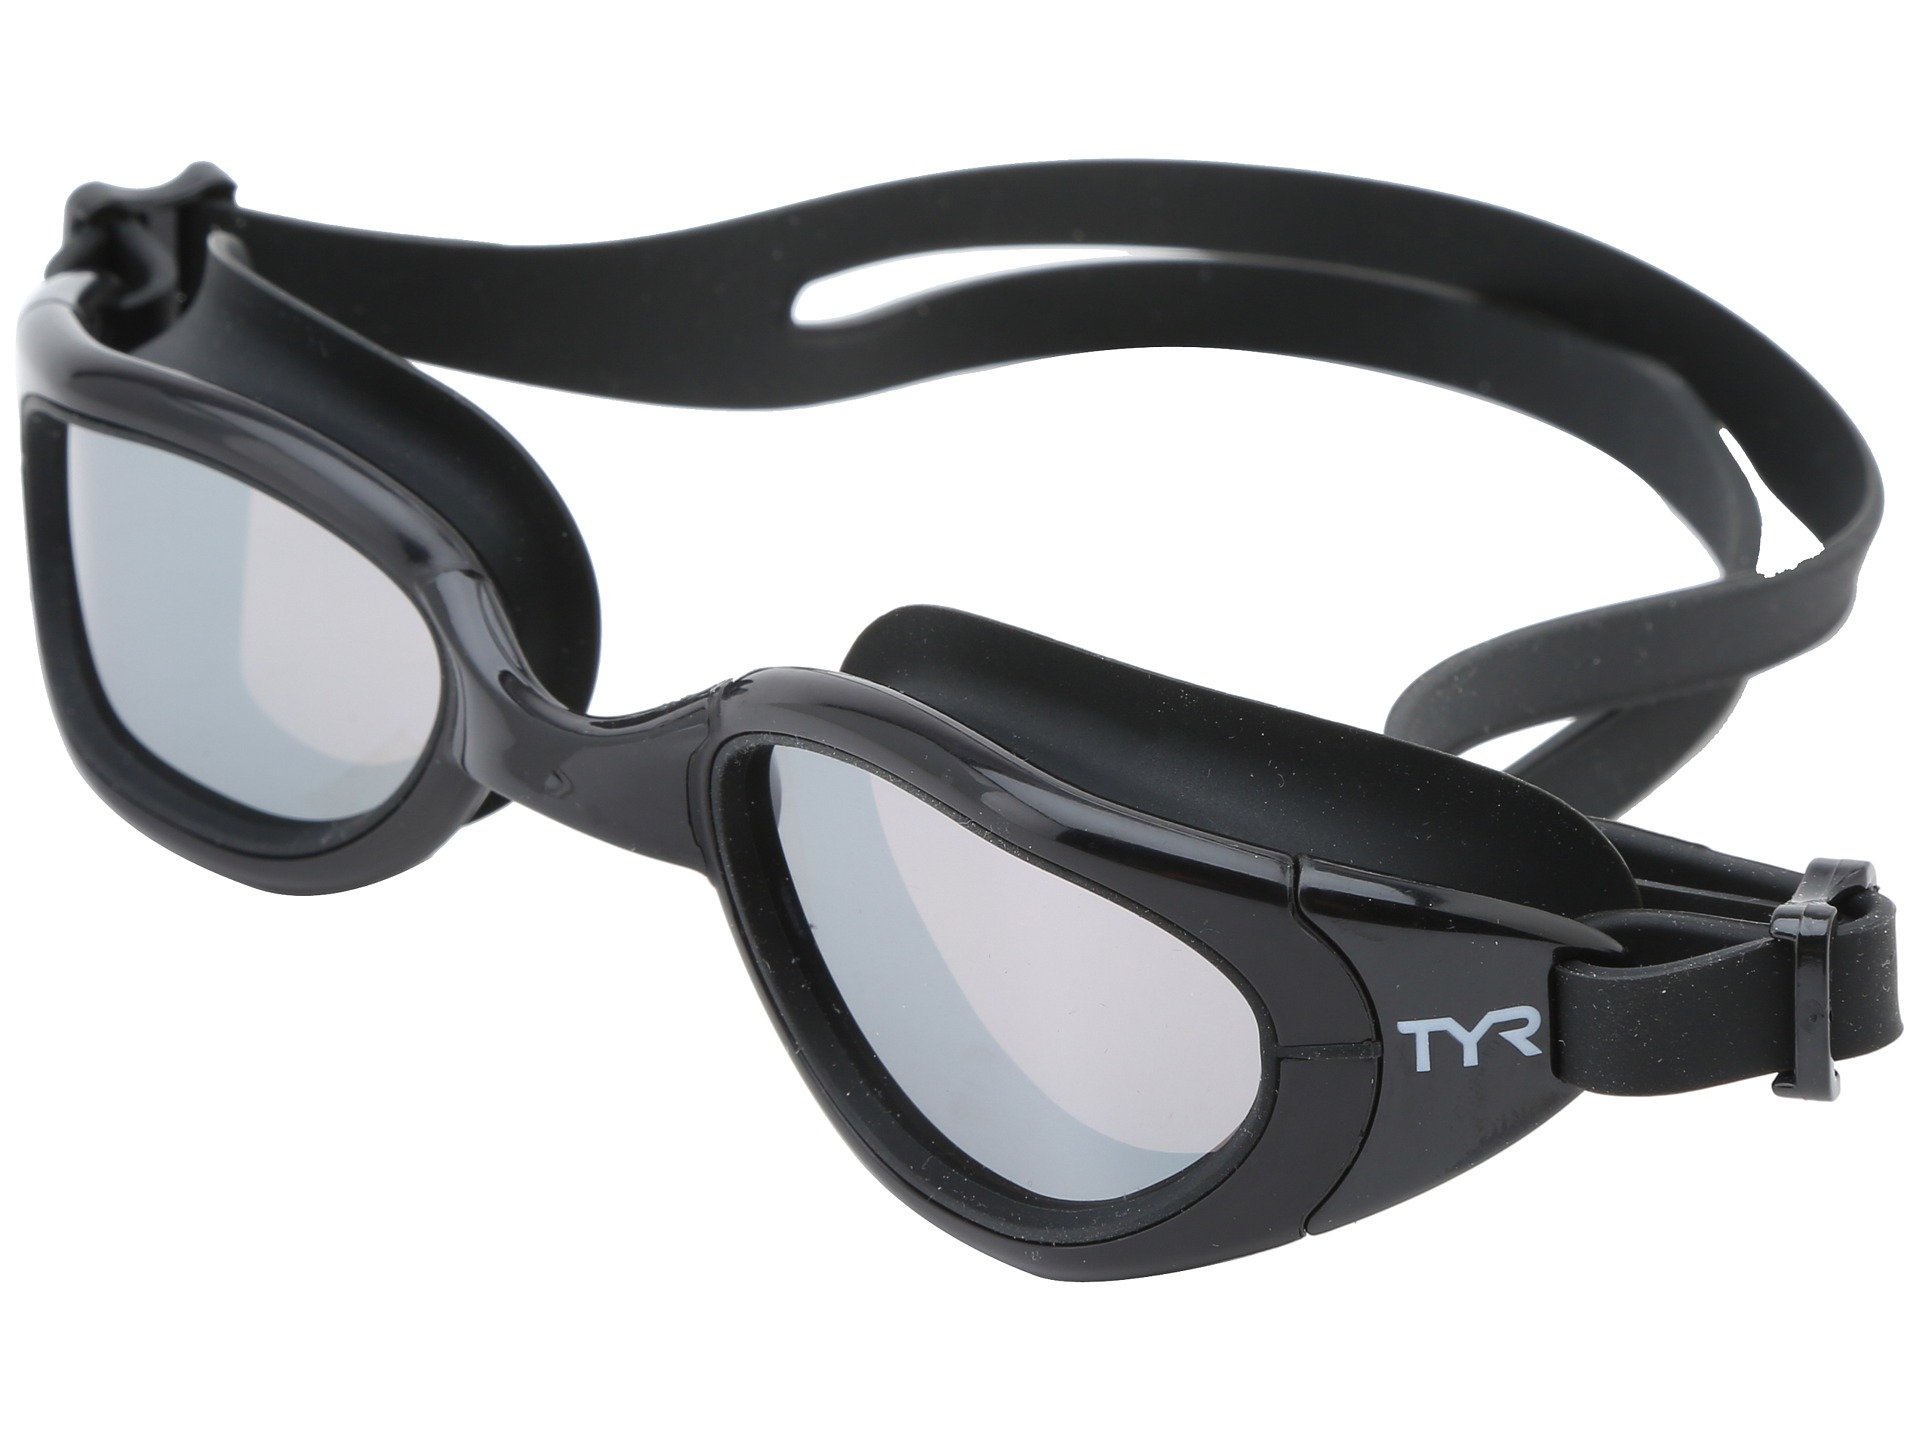 TYR Special Ops 2.0 Polarized Black Swimming Sport Goggles - image 4 of 6